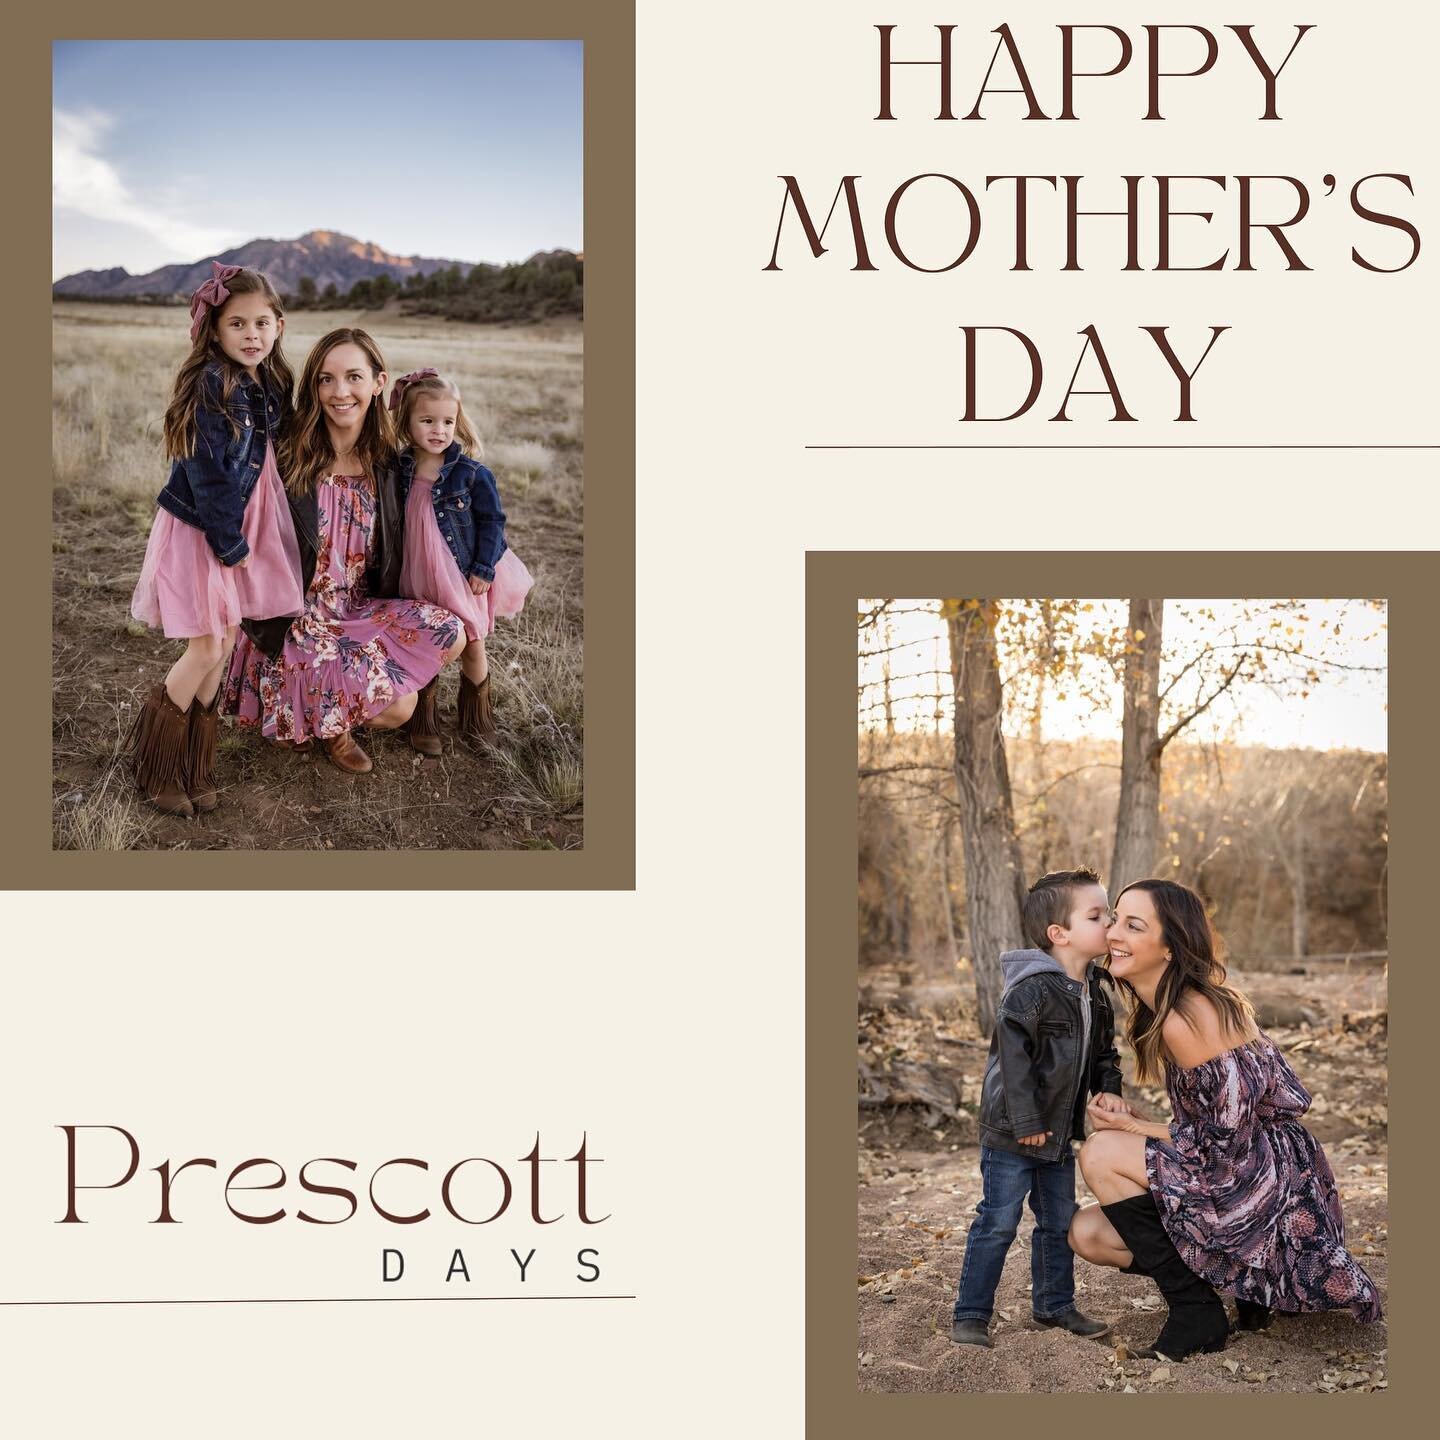 Happy Mother&rsquo;s Day to all the amazing moms out there!!!

Thank you again to @valeriefox_photo for capturing some of my all time favorite photos of me and the kids 💗 Being a mom is my greatest joy!!!